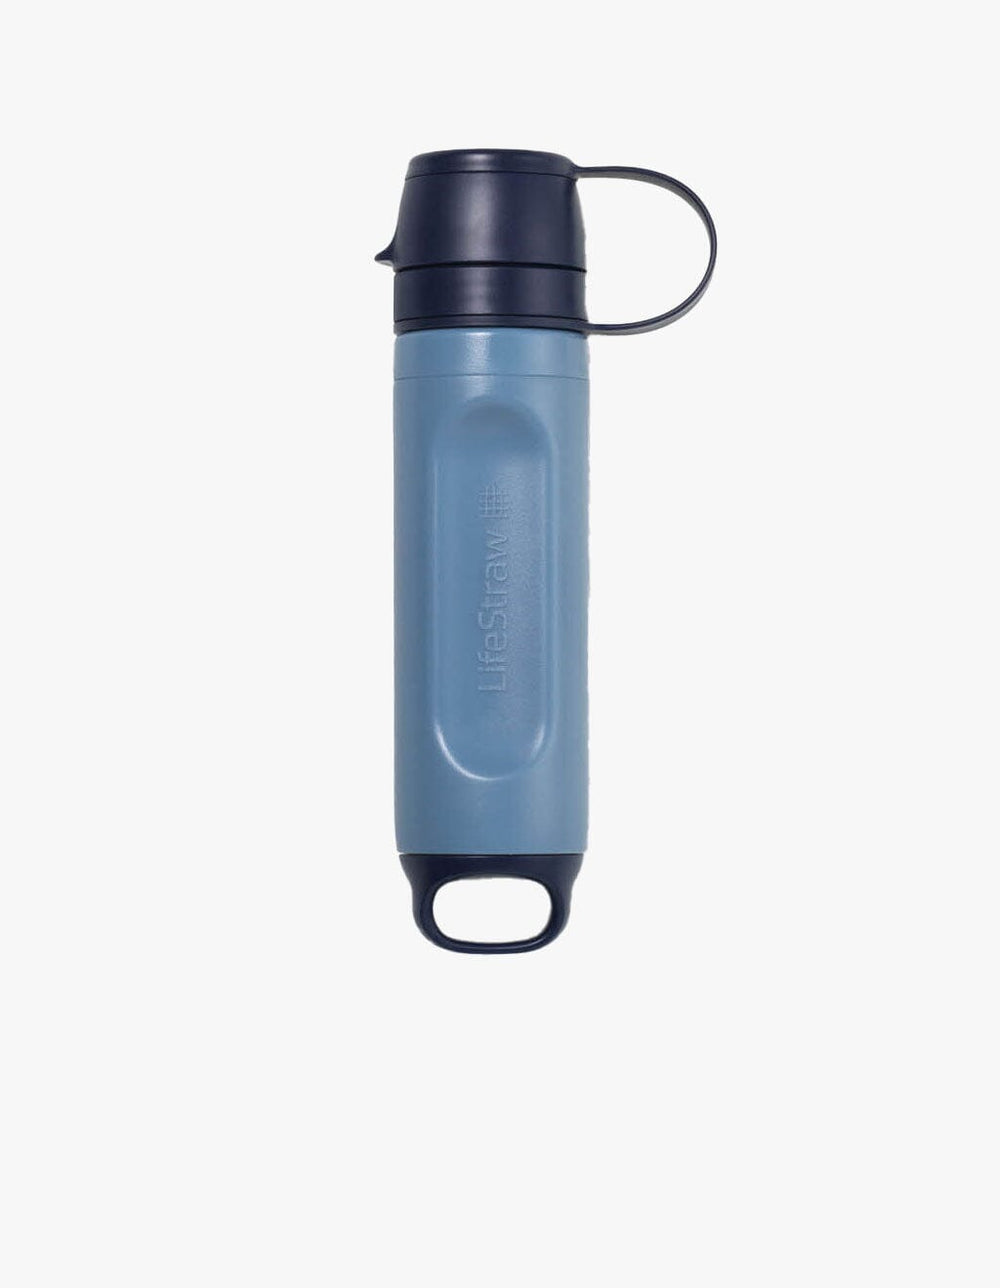 Filter Water Bottle Water to Go Review - Tales of a Backpacker